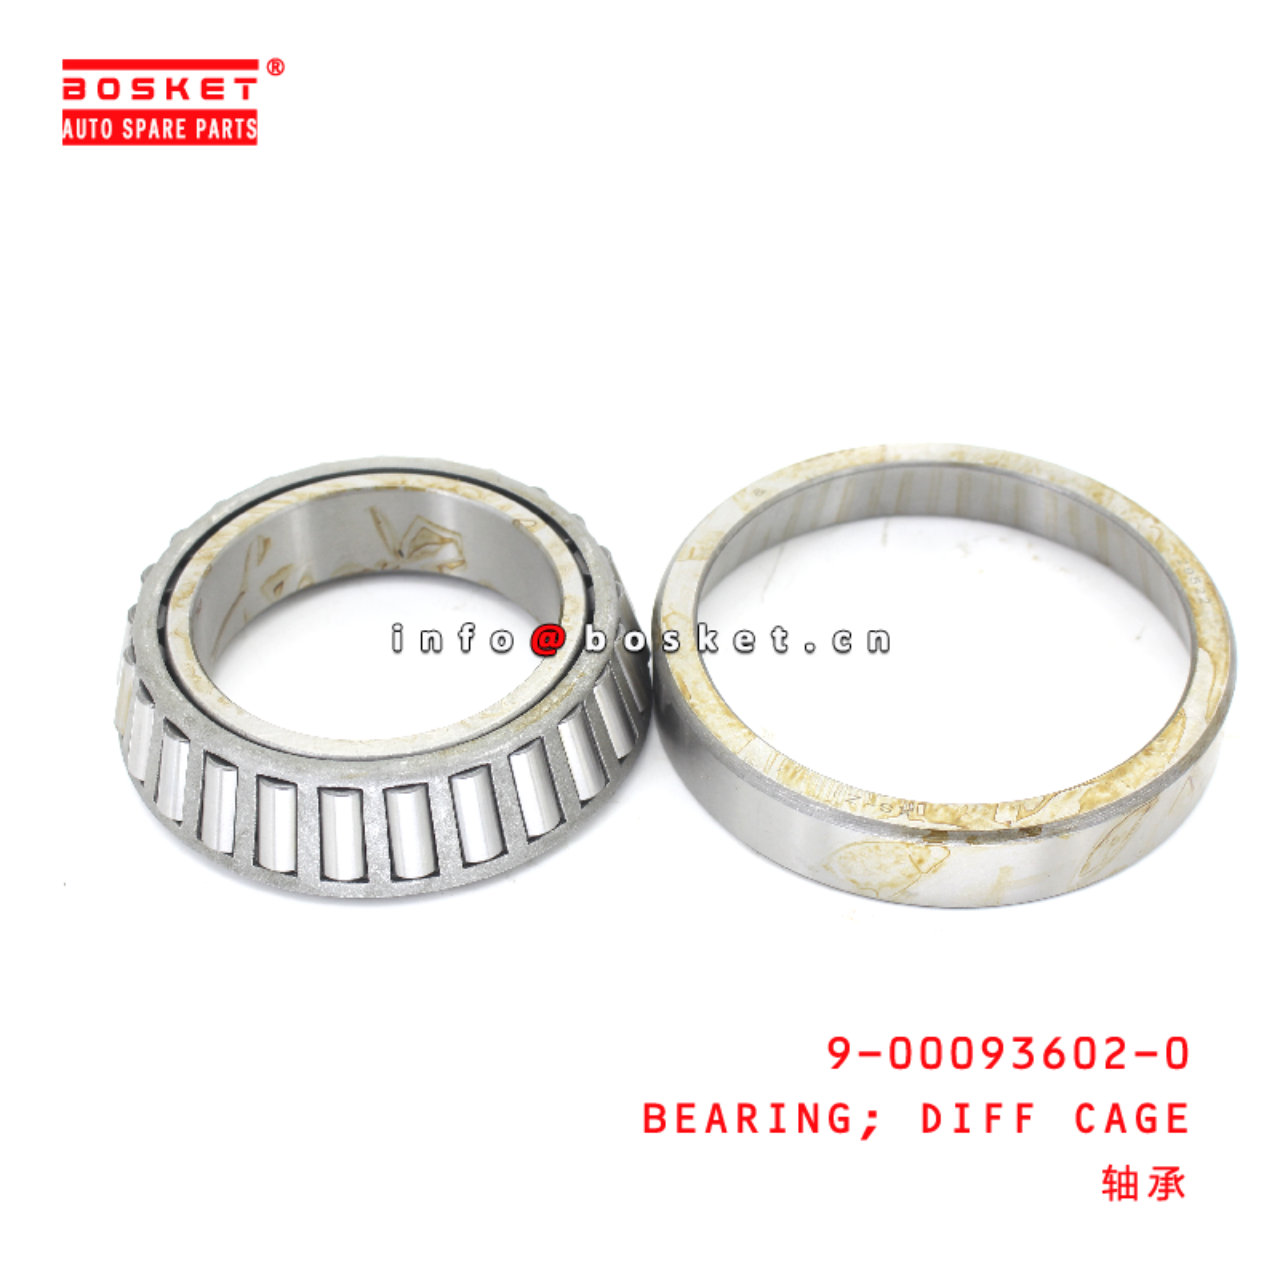 9-00093602-0 Differential Cage Bearing suitable fo...